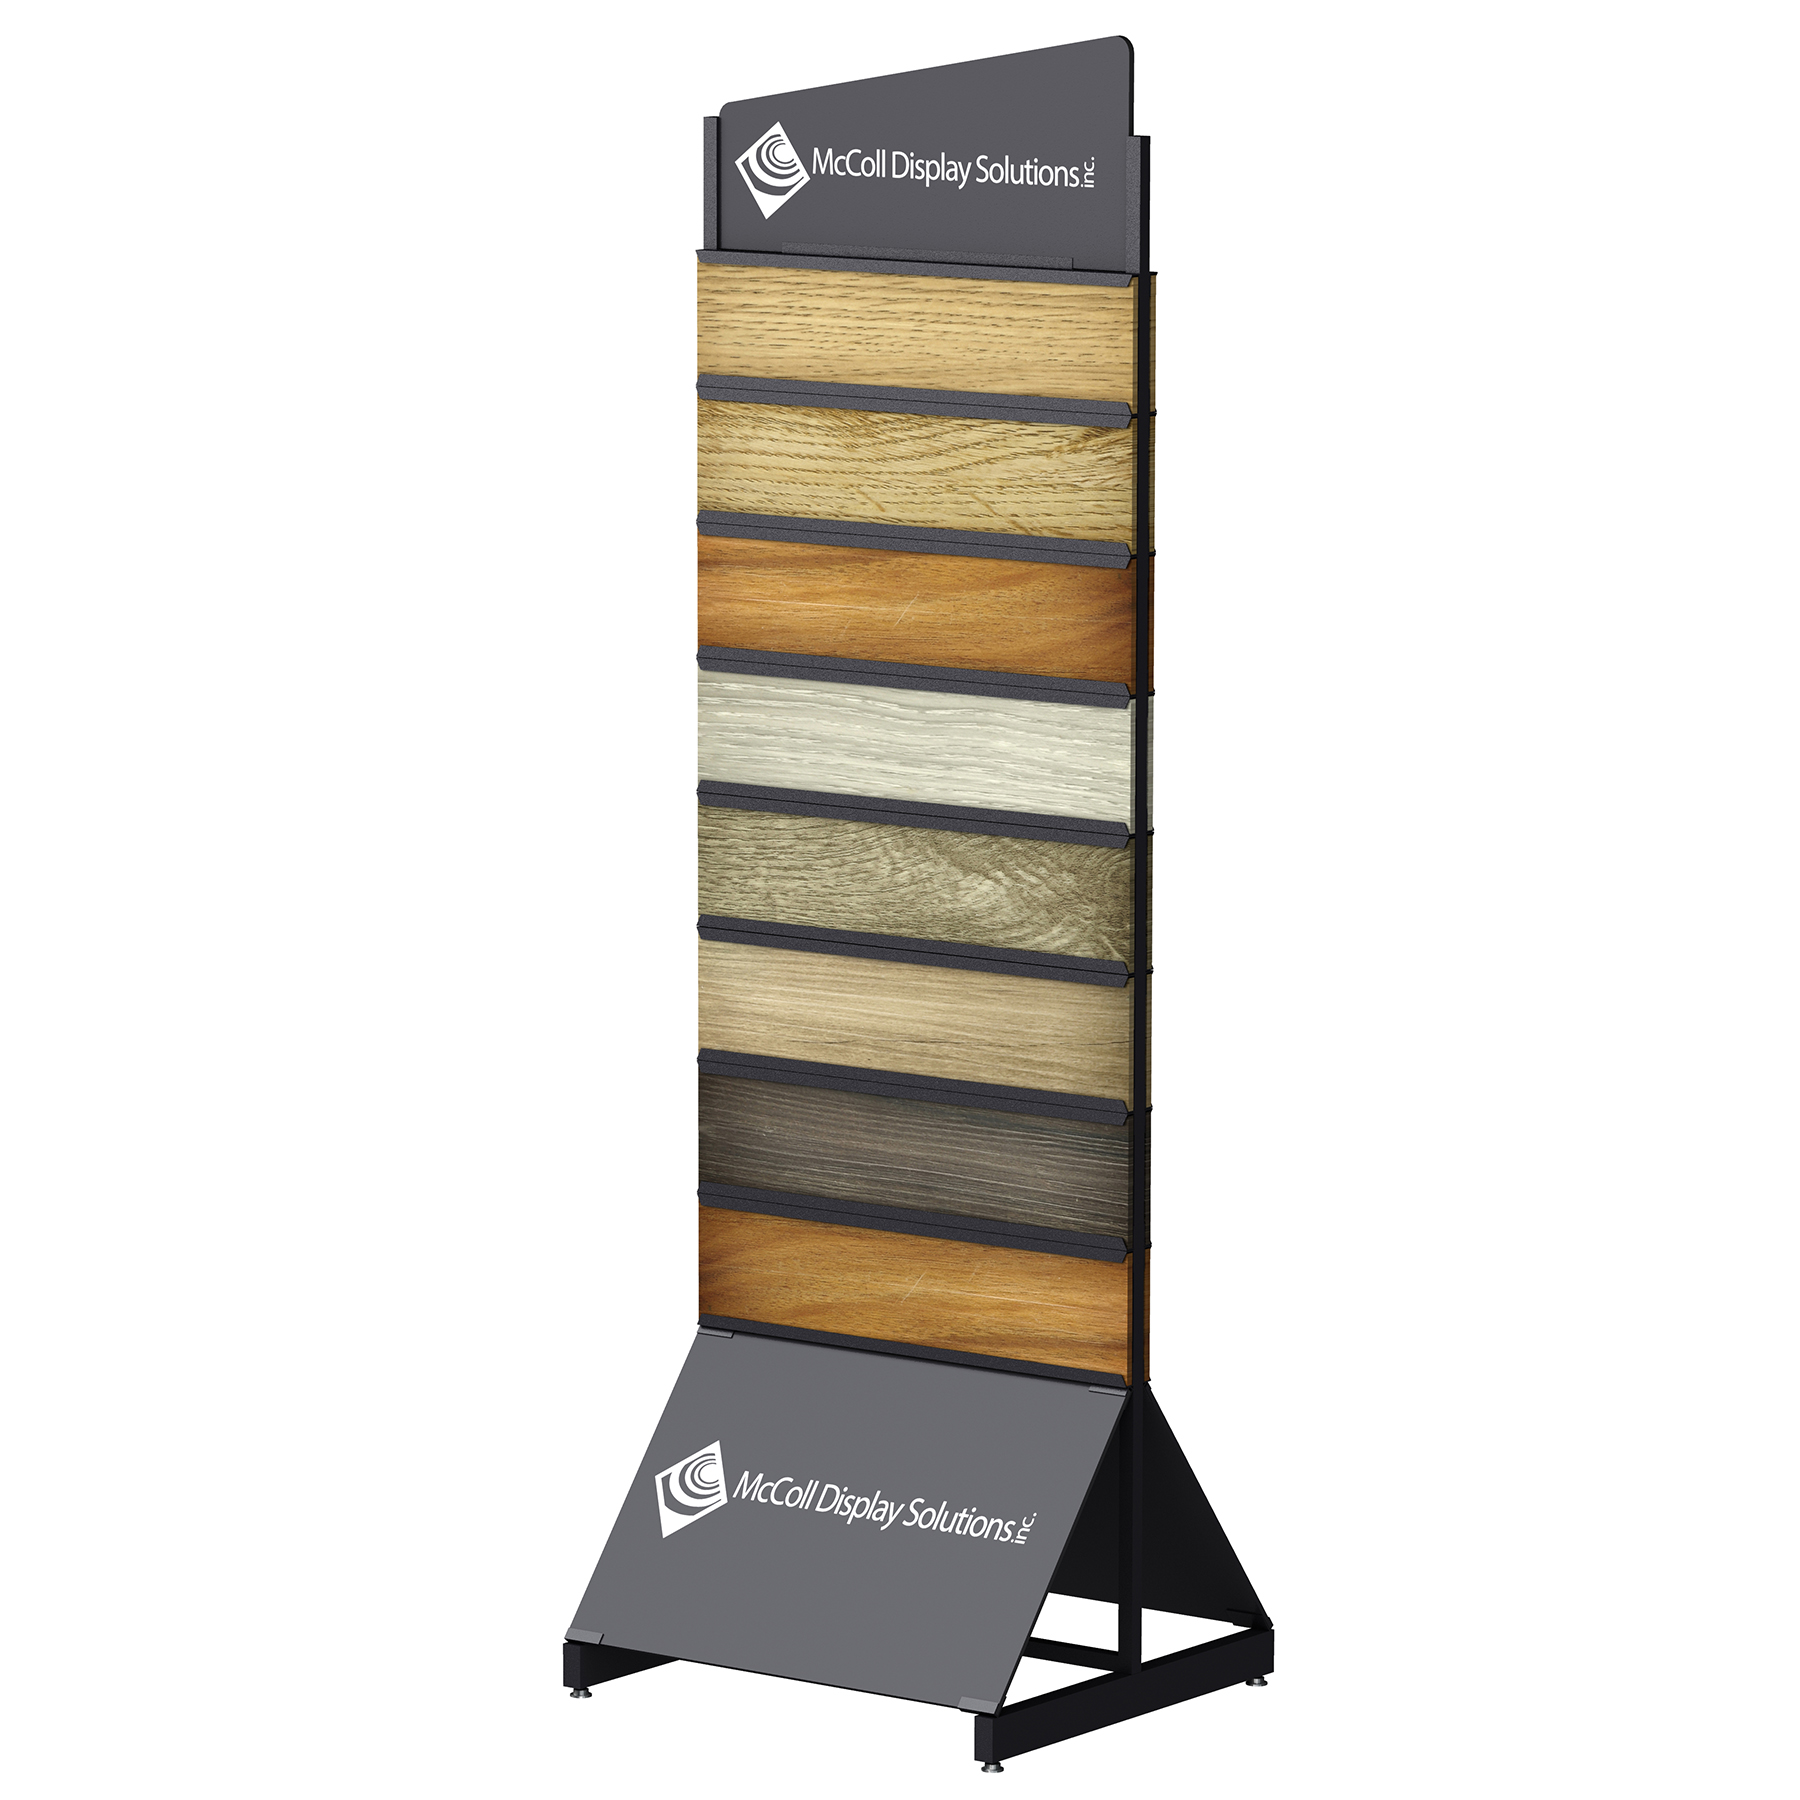 Sturdy Tubular Steel Construction CD30 Tower Display for Hardwood Laminate Plank Flooring with Screen Printed Sign